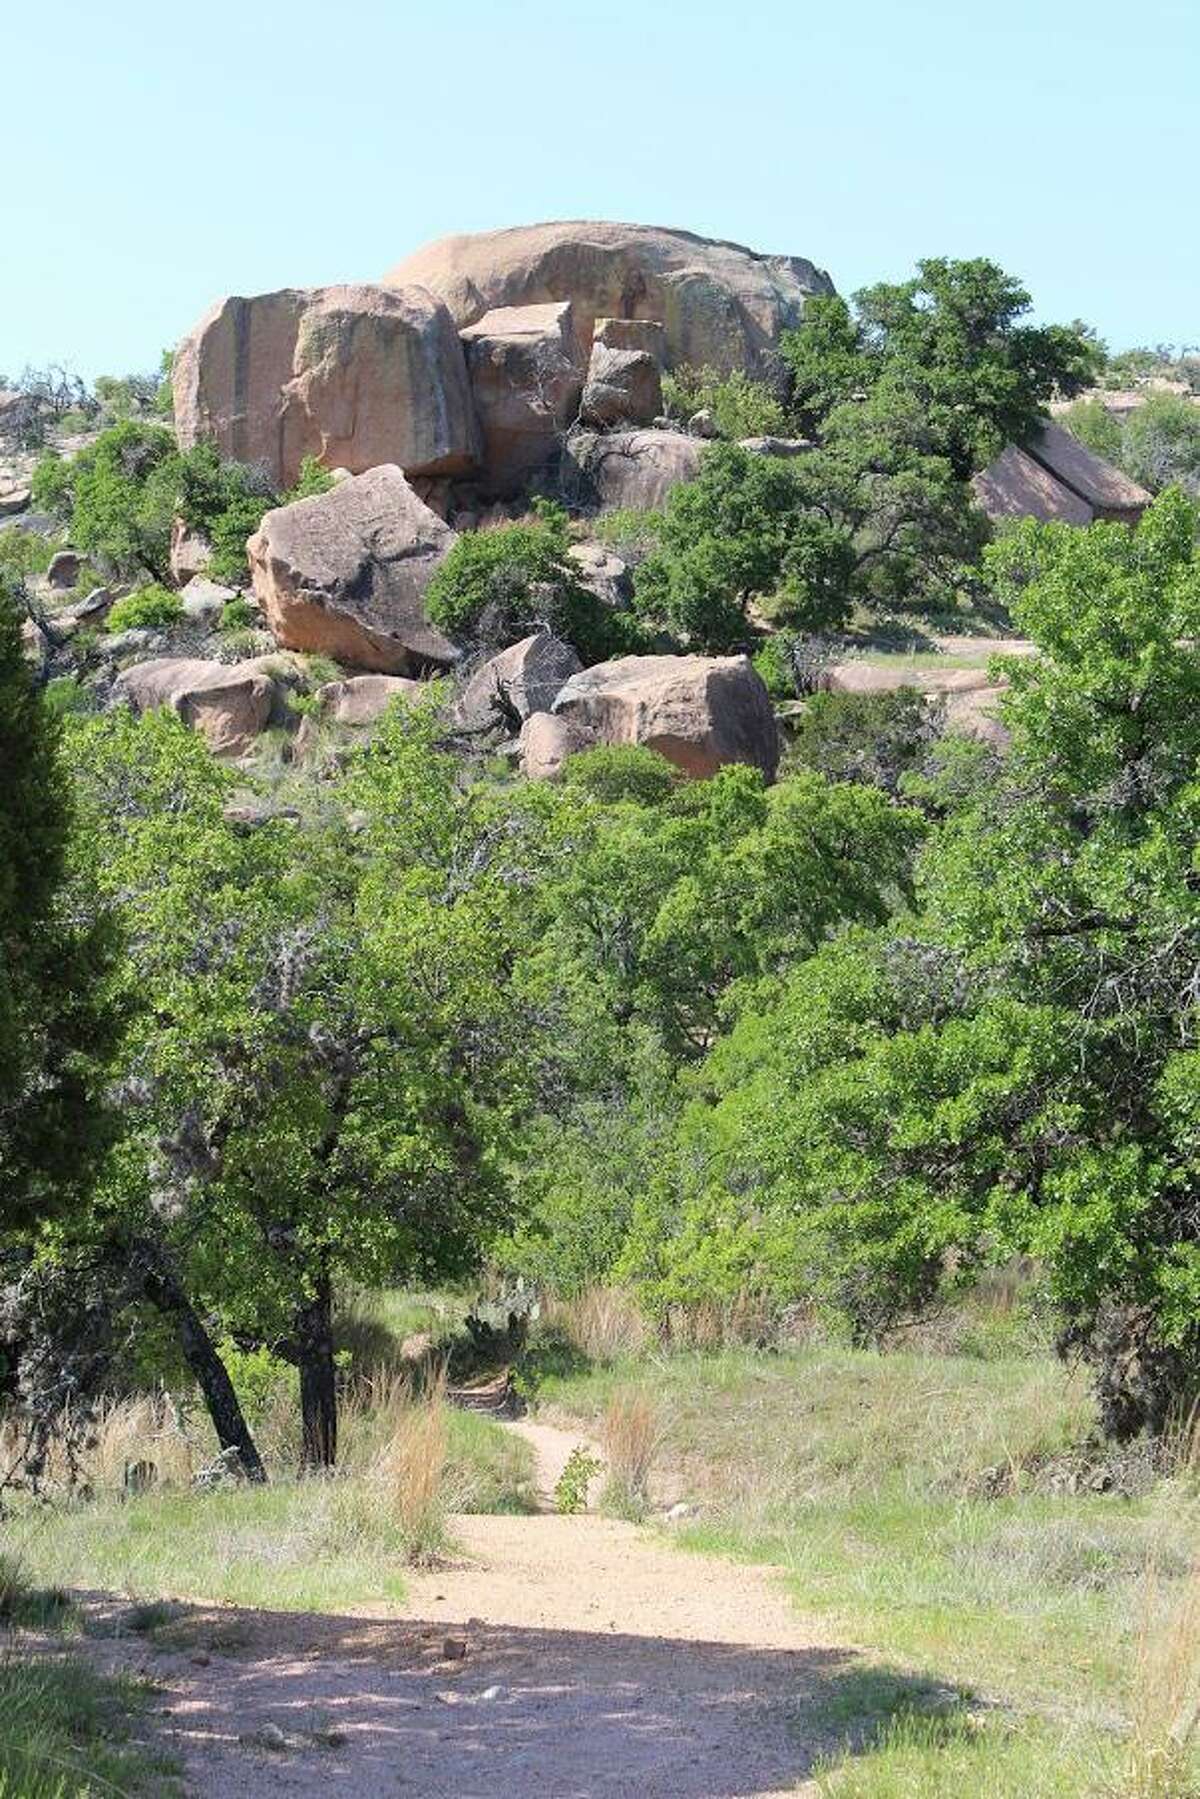 One of the many trail entrances to Little Rock, one of the rock structures located to the west of Enchanted Rock.